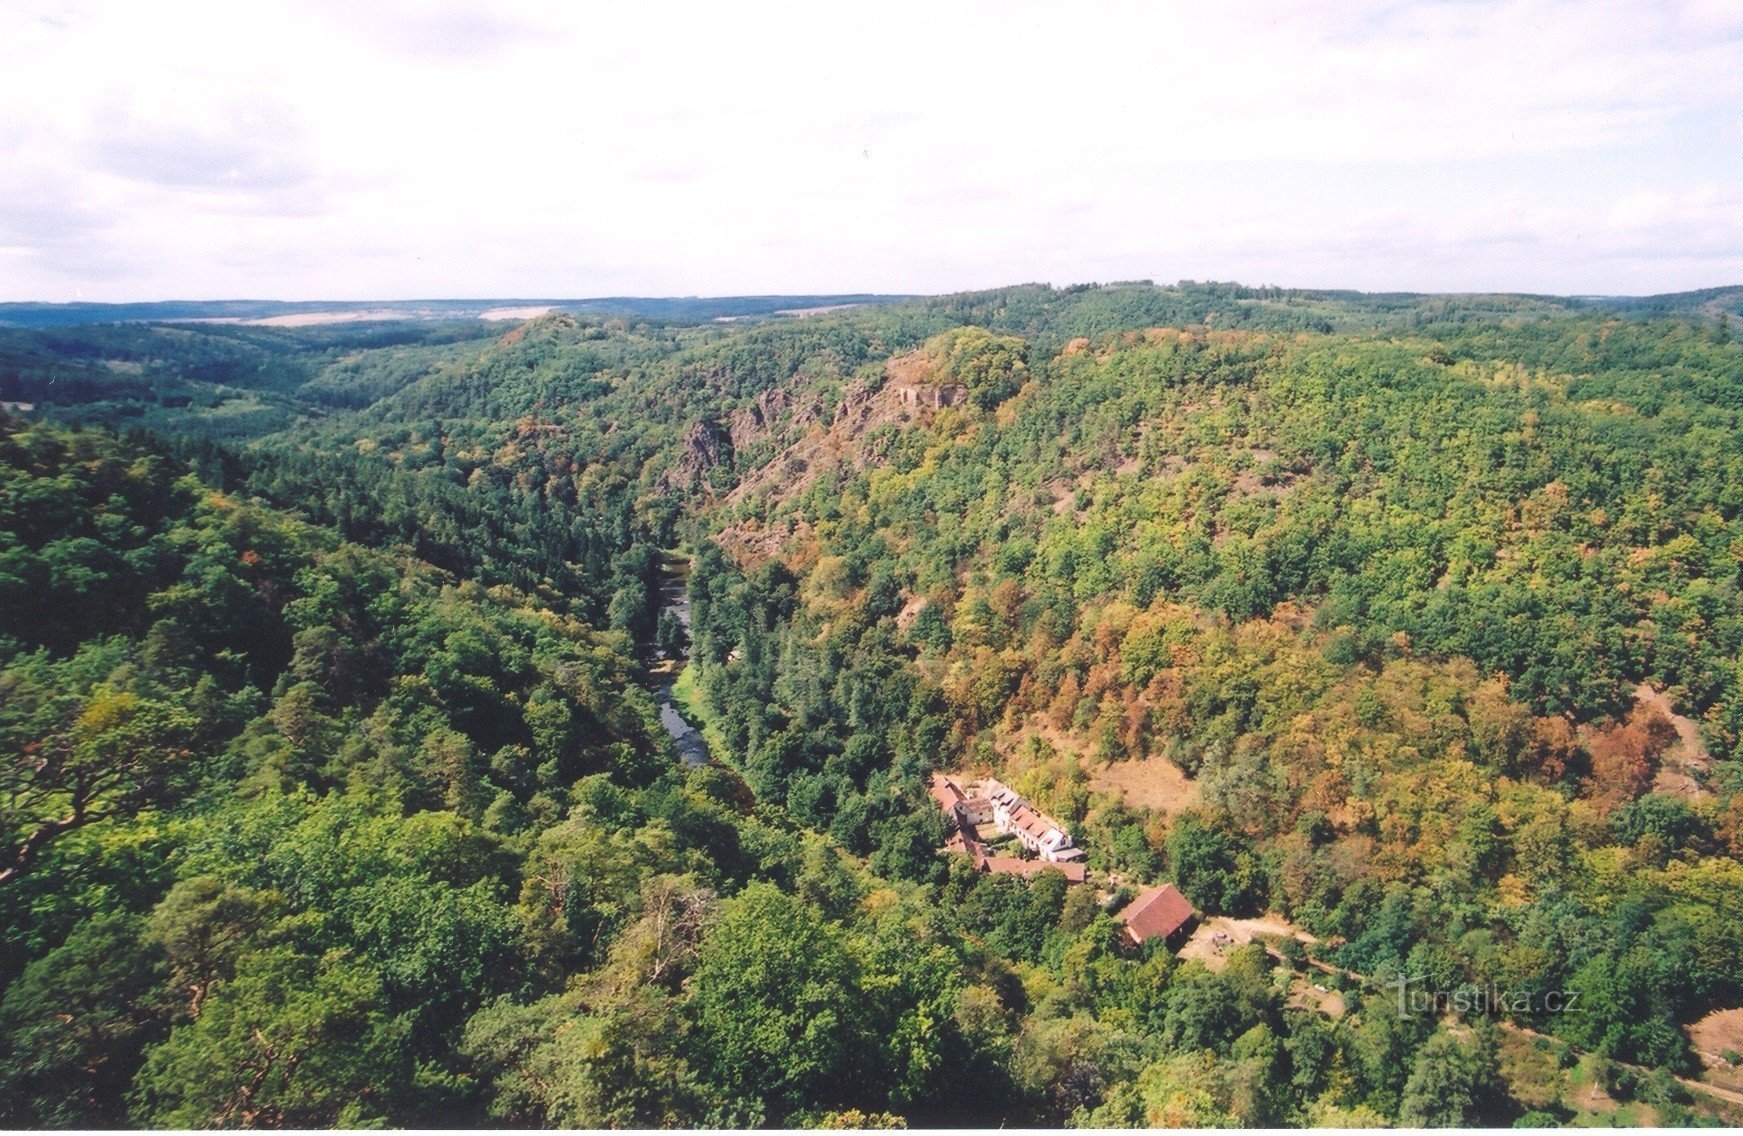 View of the Dlouhá Oslava valley